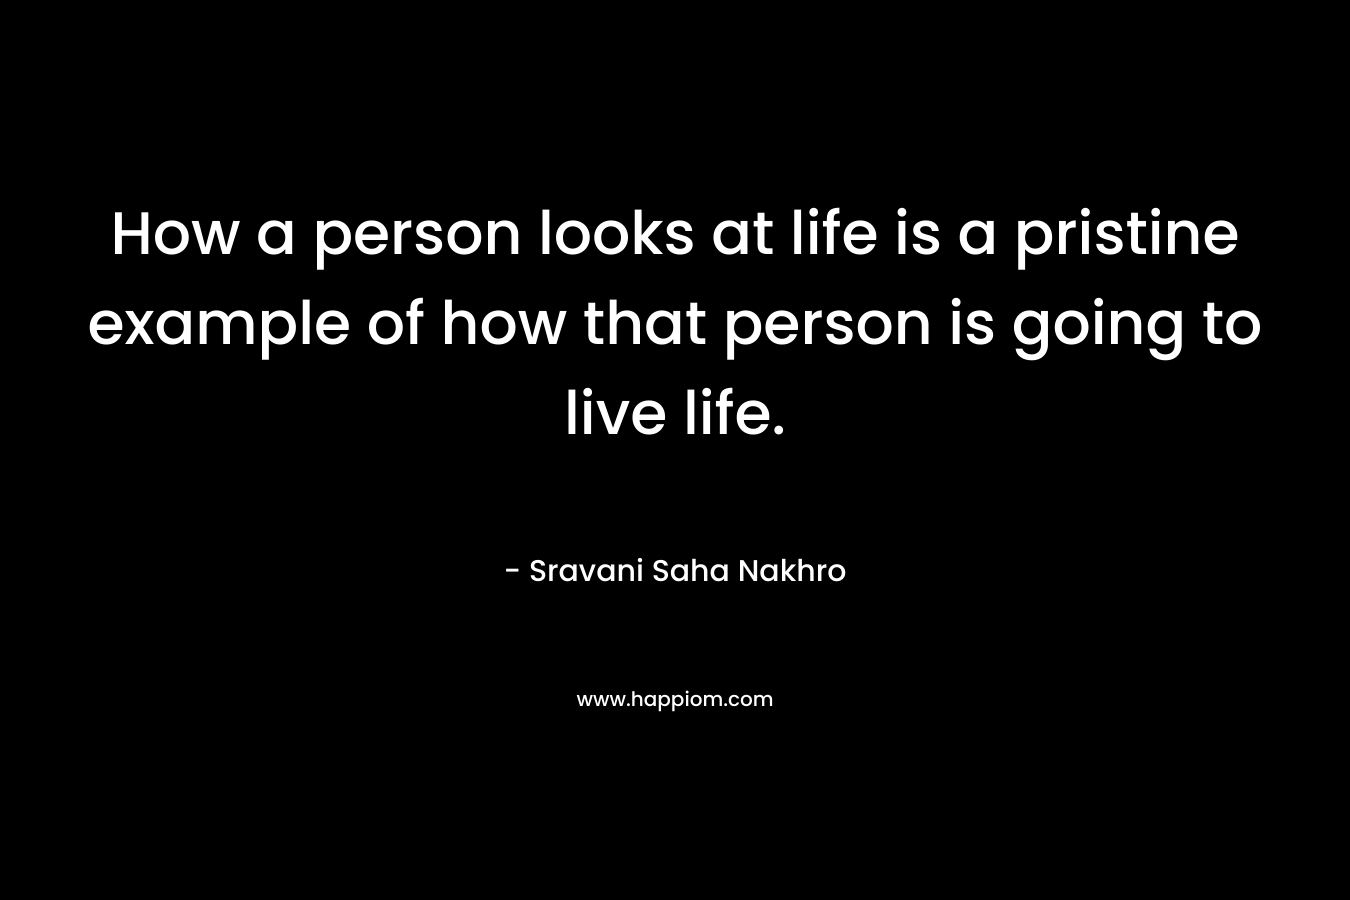 How a person looks at life is a pristine example of how that person is going to live life. – Sravani Saha Nakhro